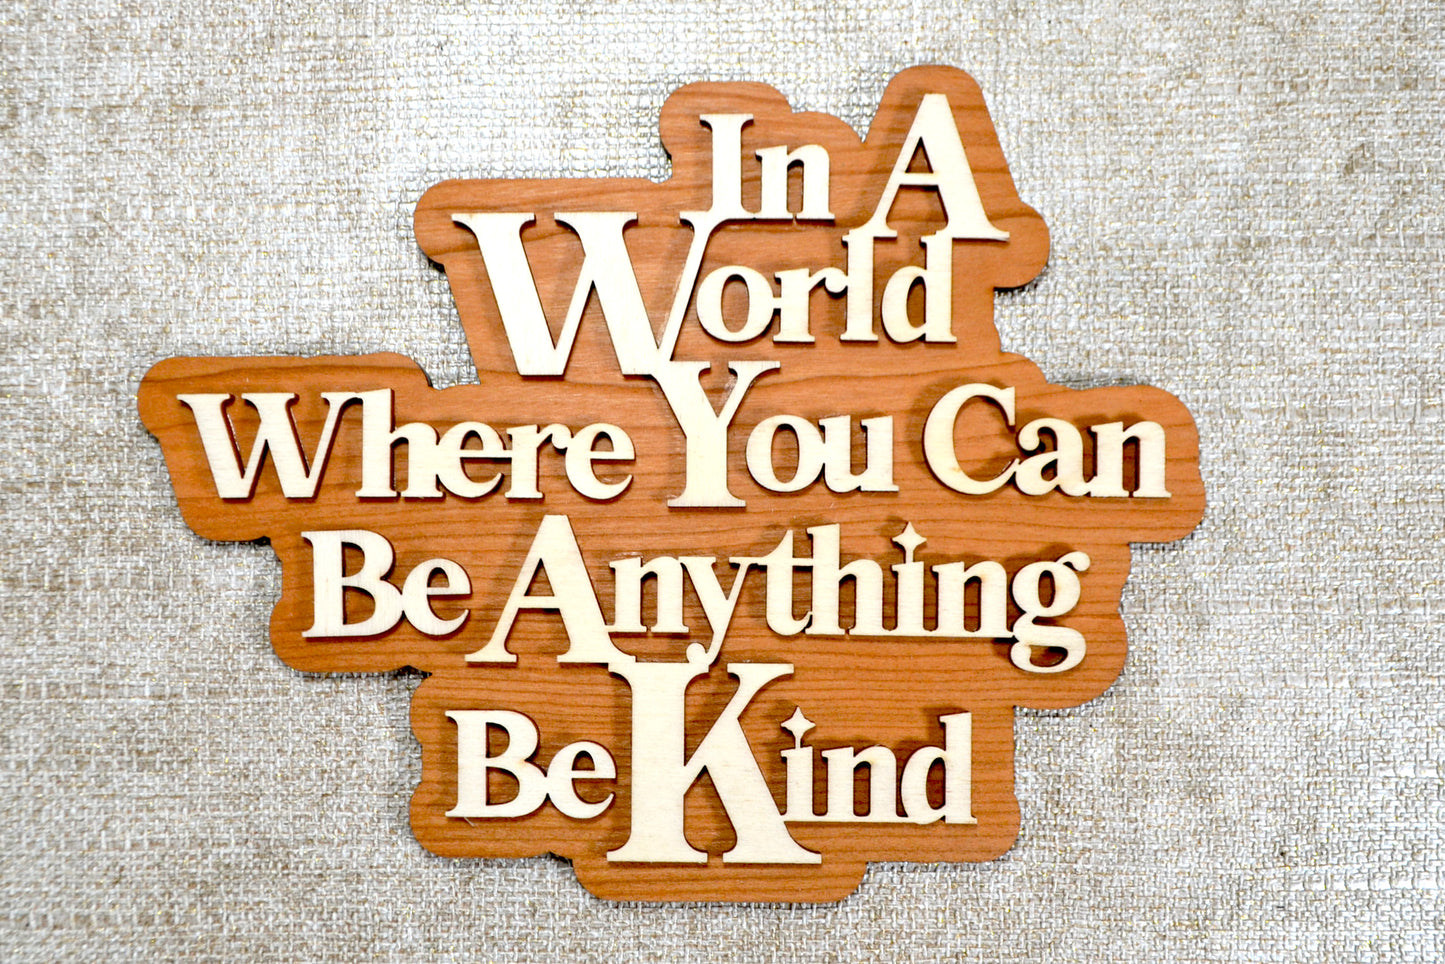 In A World Where You Can Be Anything Be Kind - Wooden Plaque